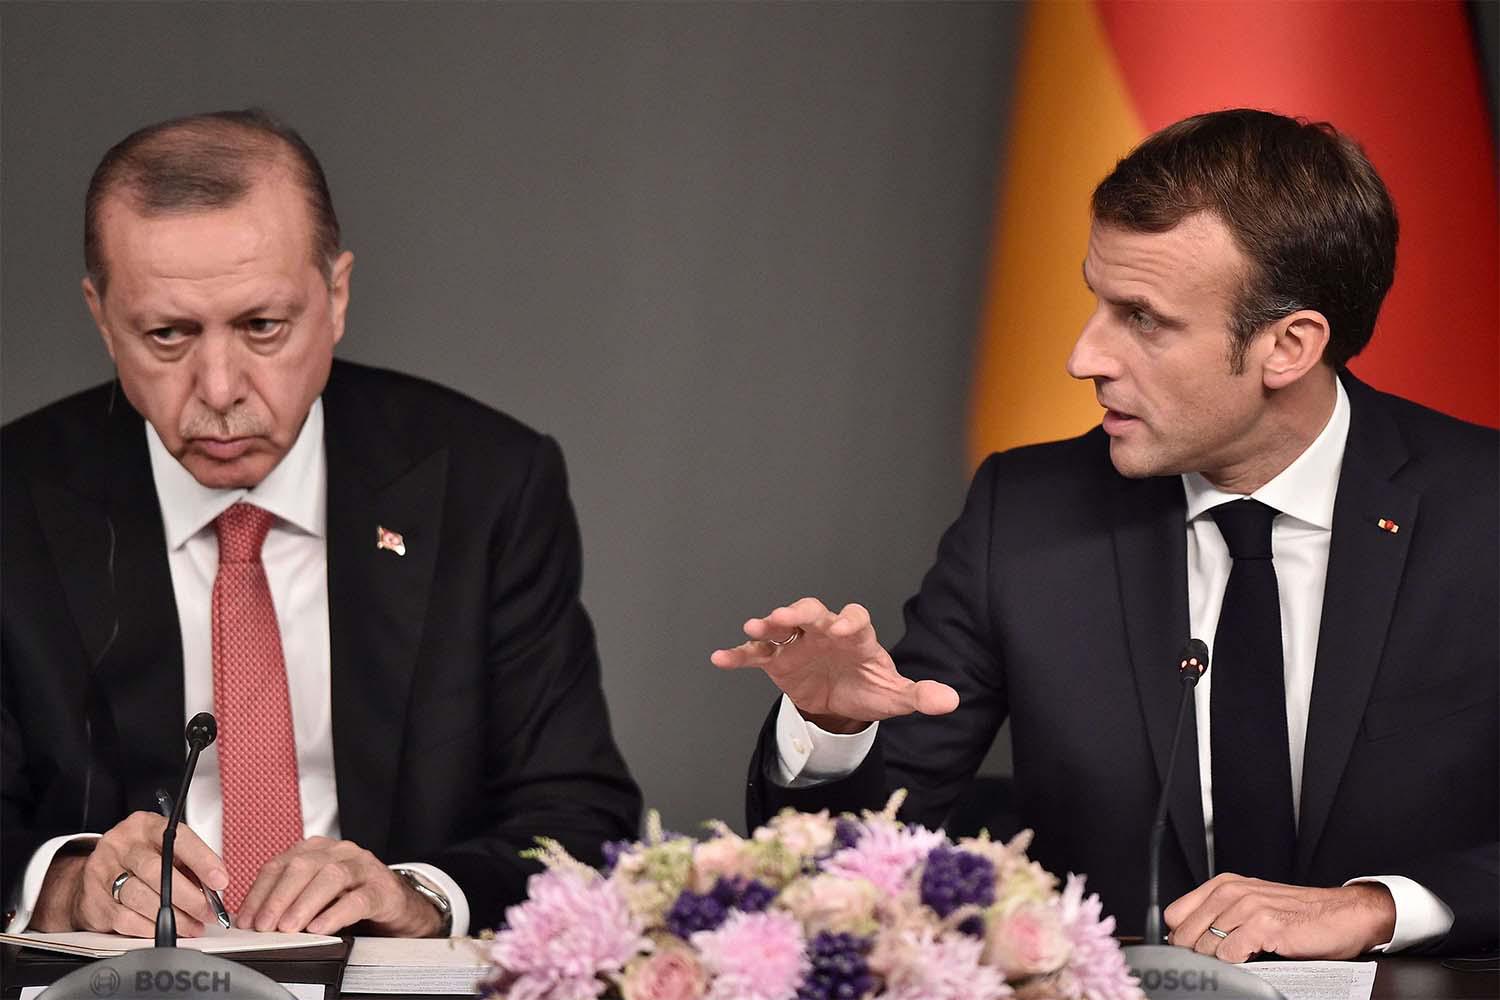 The relationship between France and Turkey has worsened as they disagree over the Libya conflict and the eastern Mediterranean